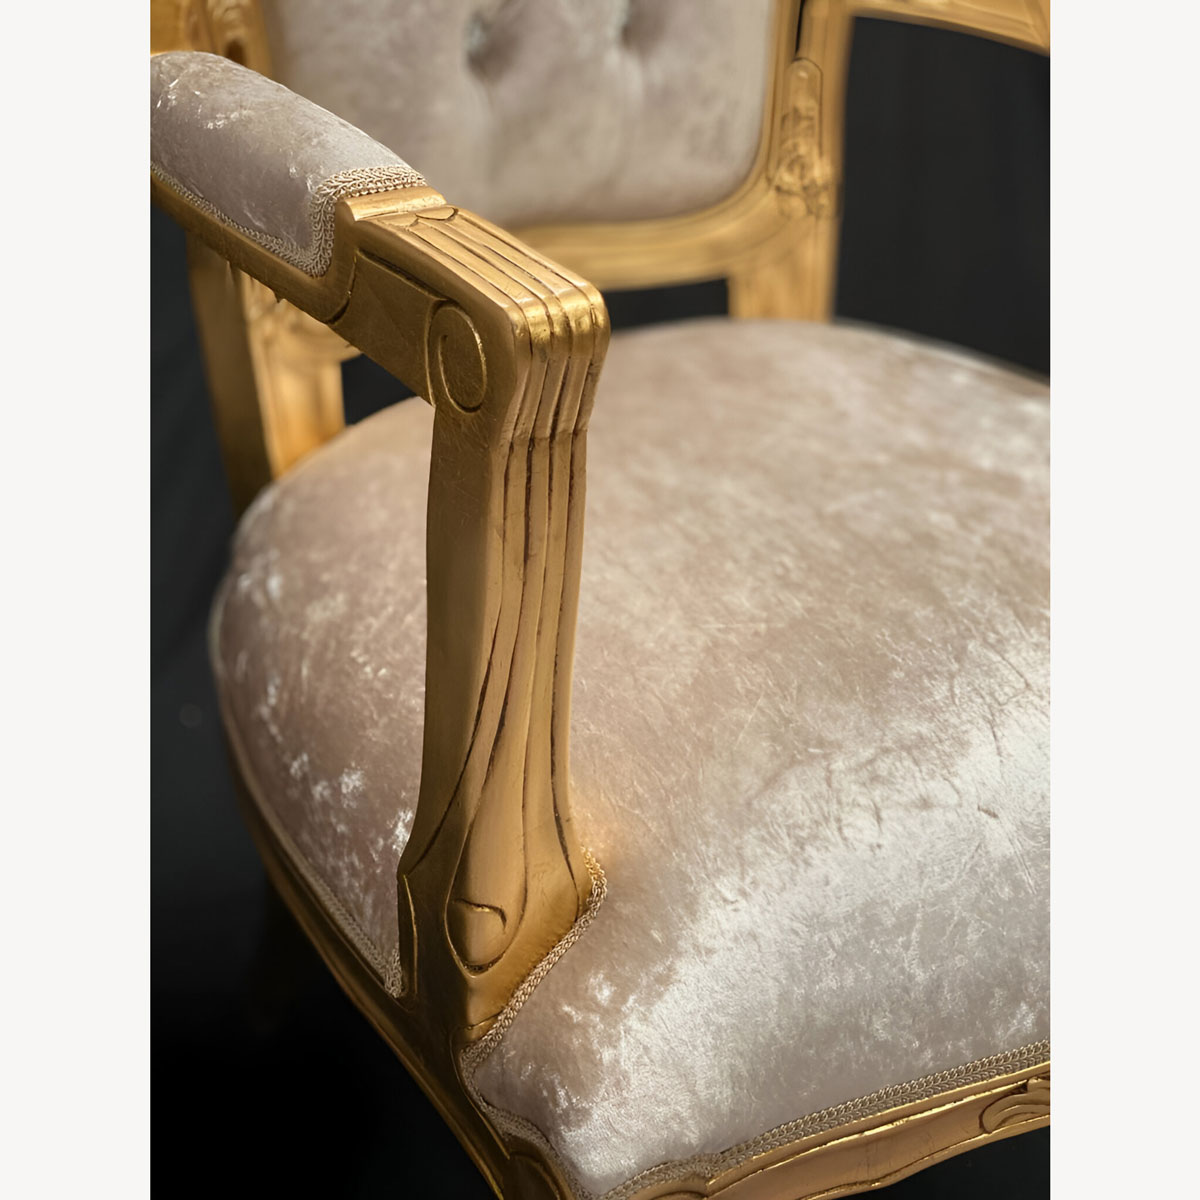 Franciscan Wedding Or Dining Chair With Arms Gold Leaf With Ivory Cream Crushed Velvet Fabric With Crystal Buttons 3 - Hampshire Barn Interiors - Franciscan Wedding Or Dining Chair With Arms Gold Leaf With Ivory Cream Crushed Velvet Fabric With Crystal Buttons -